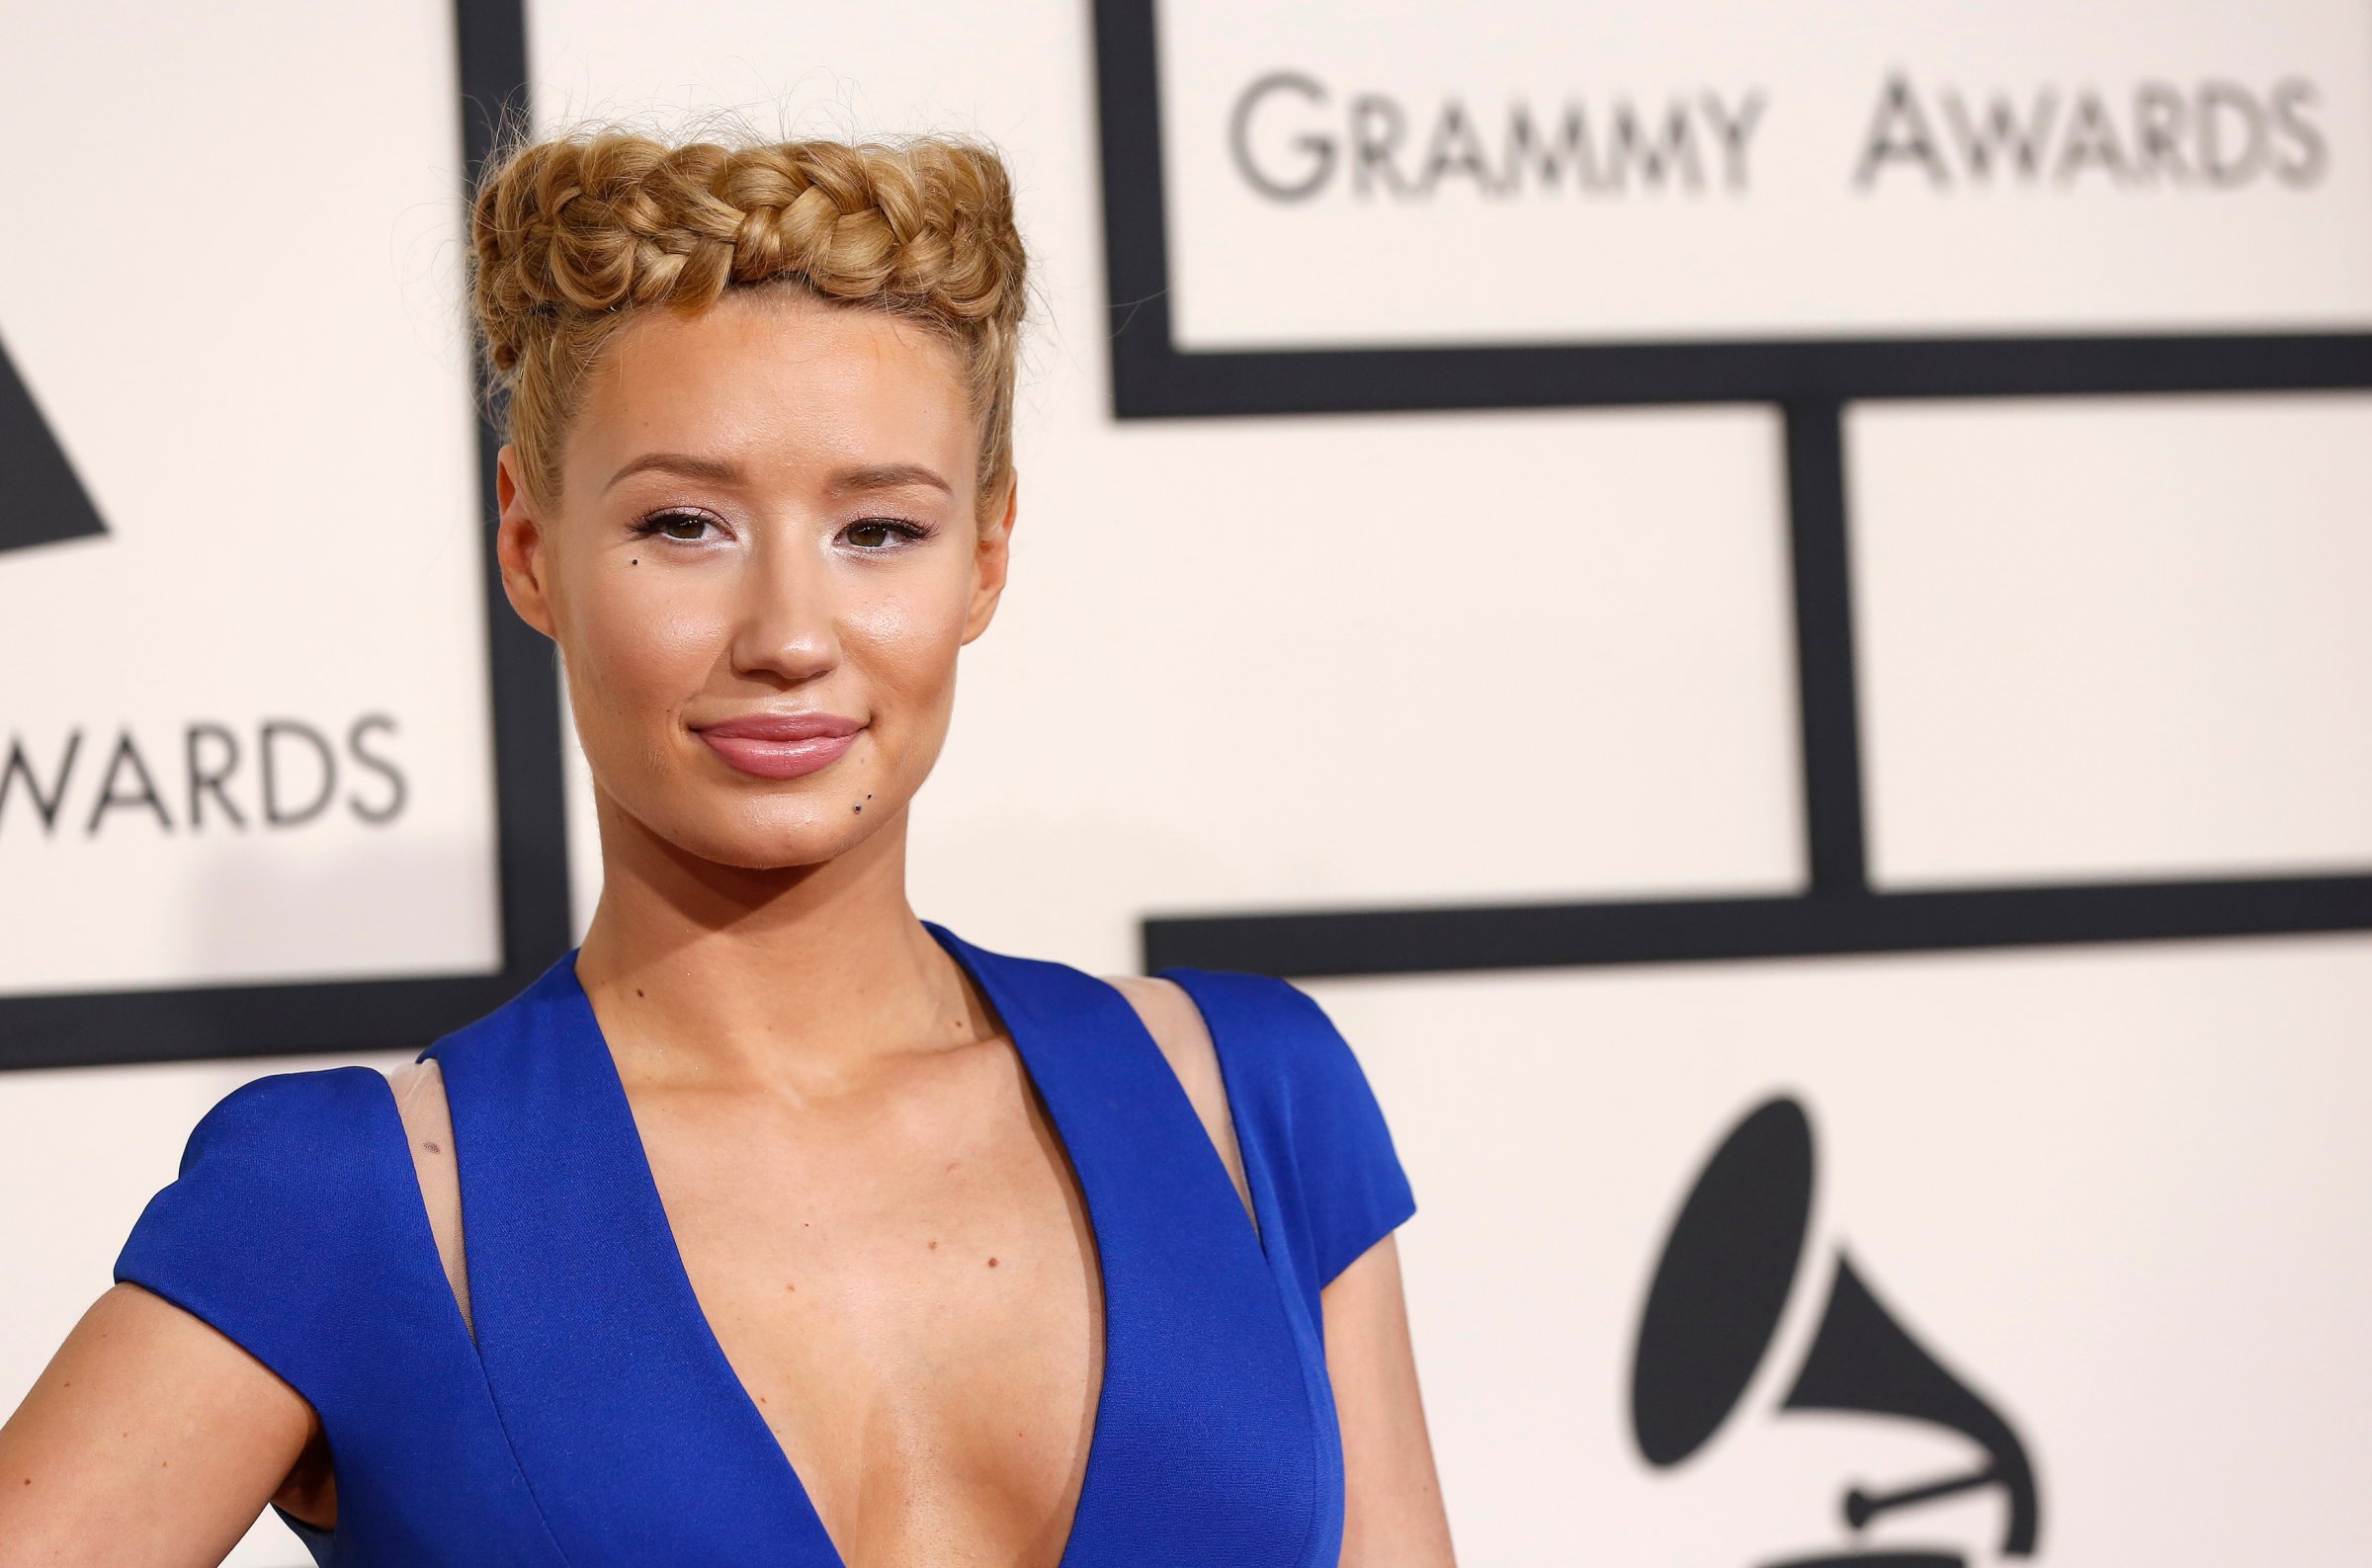 Iggy Azalea arrives at the 57th annual Grammy Awards in Los Angeles